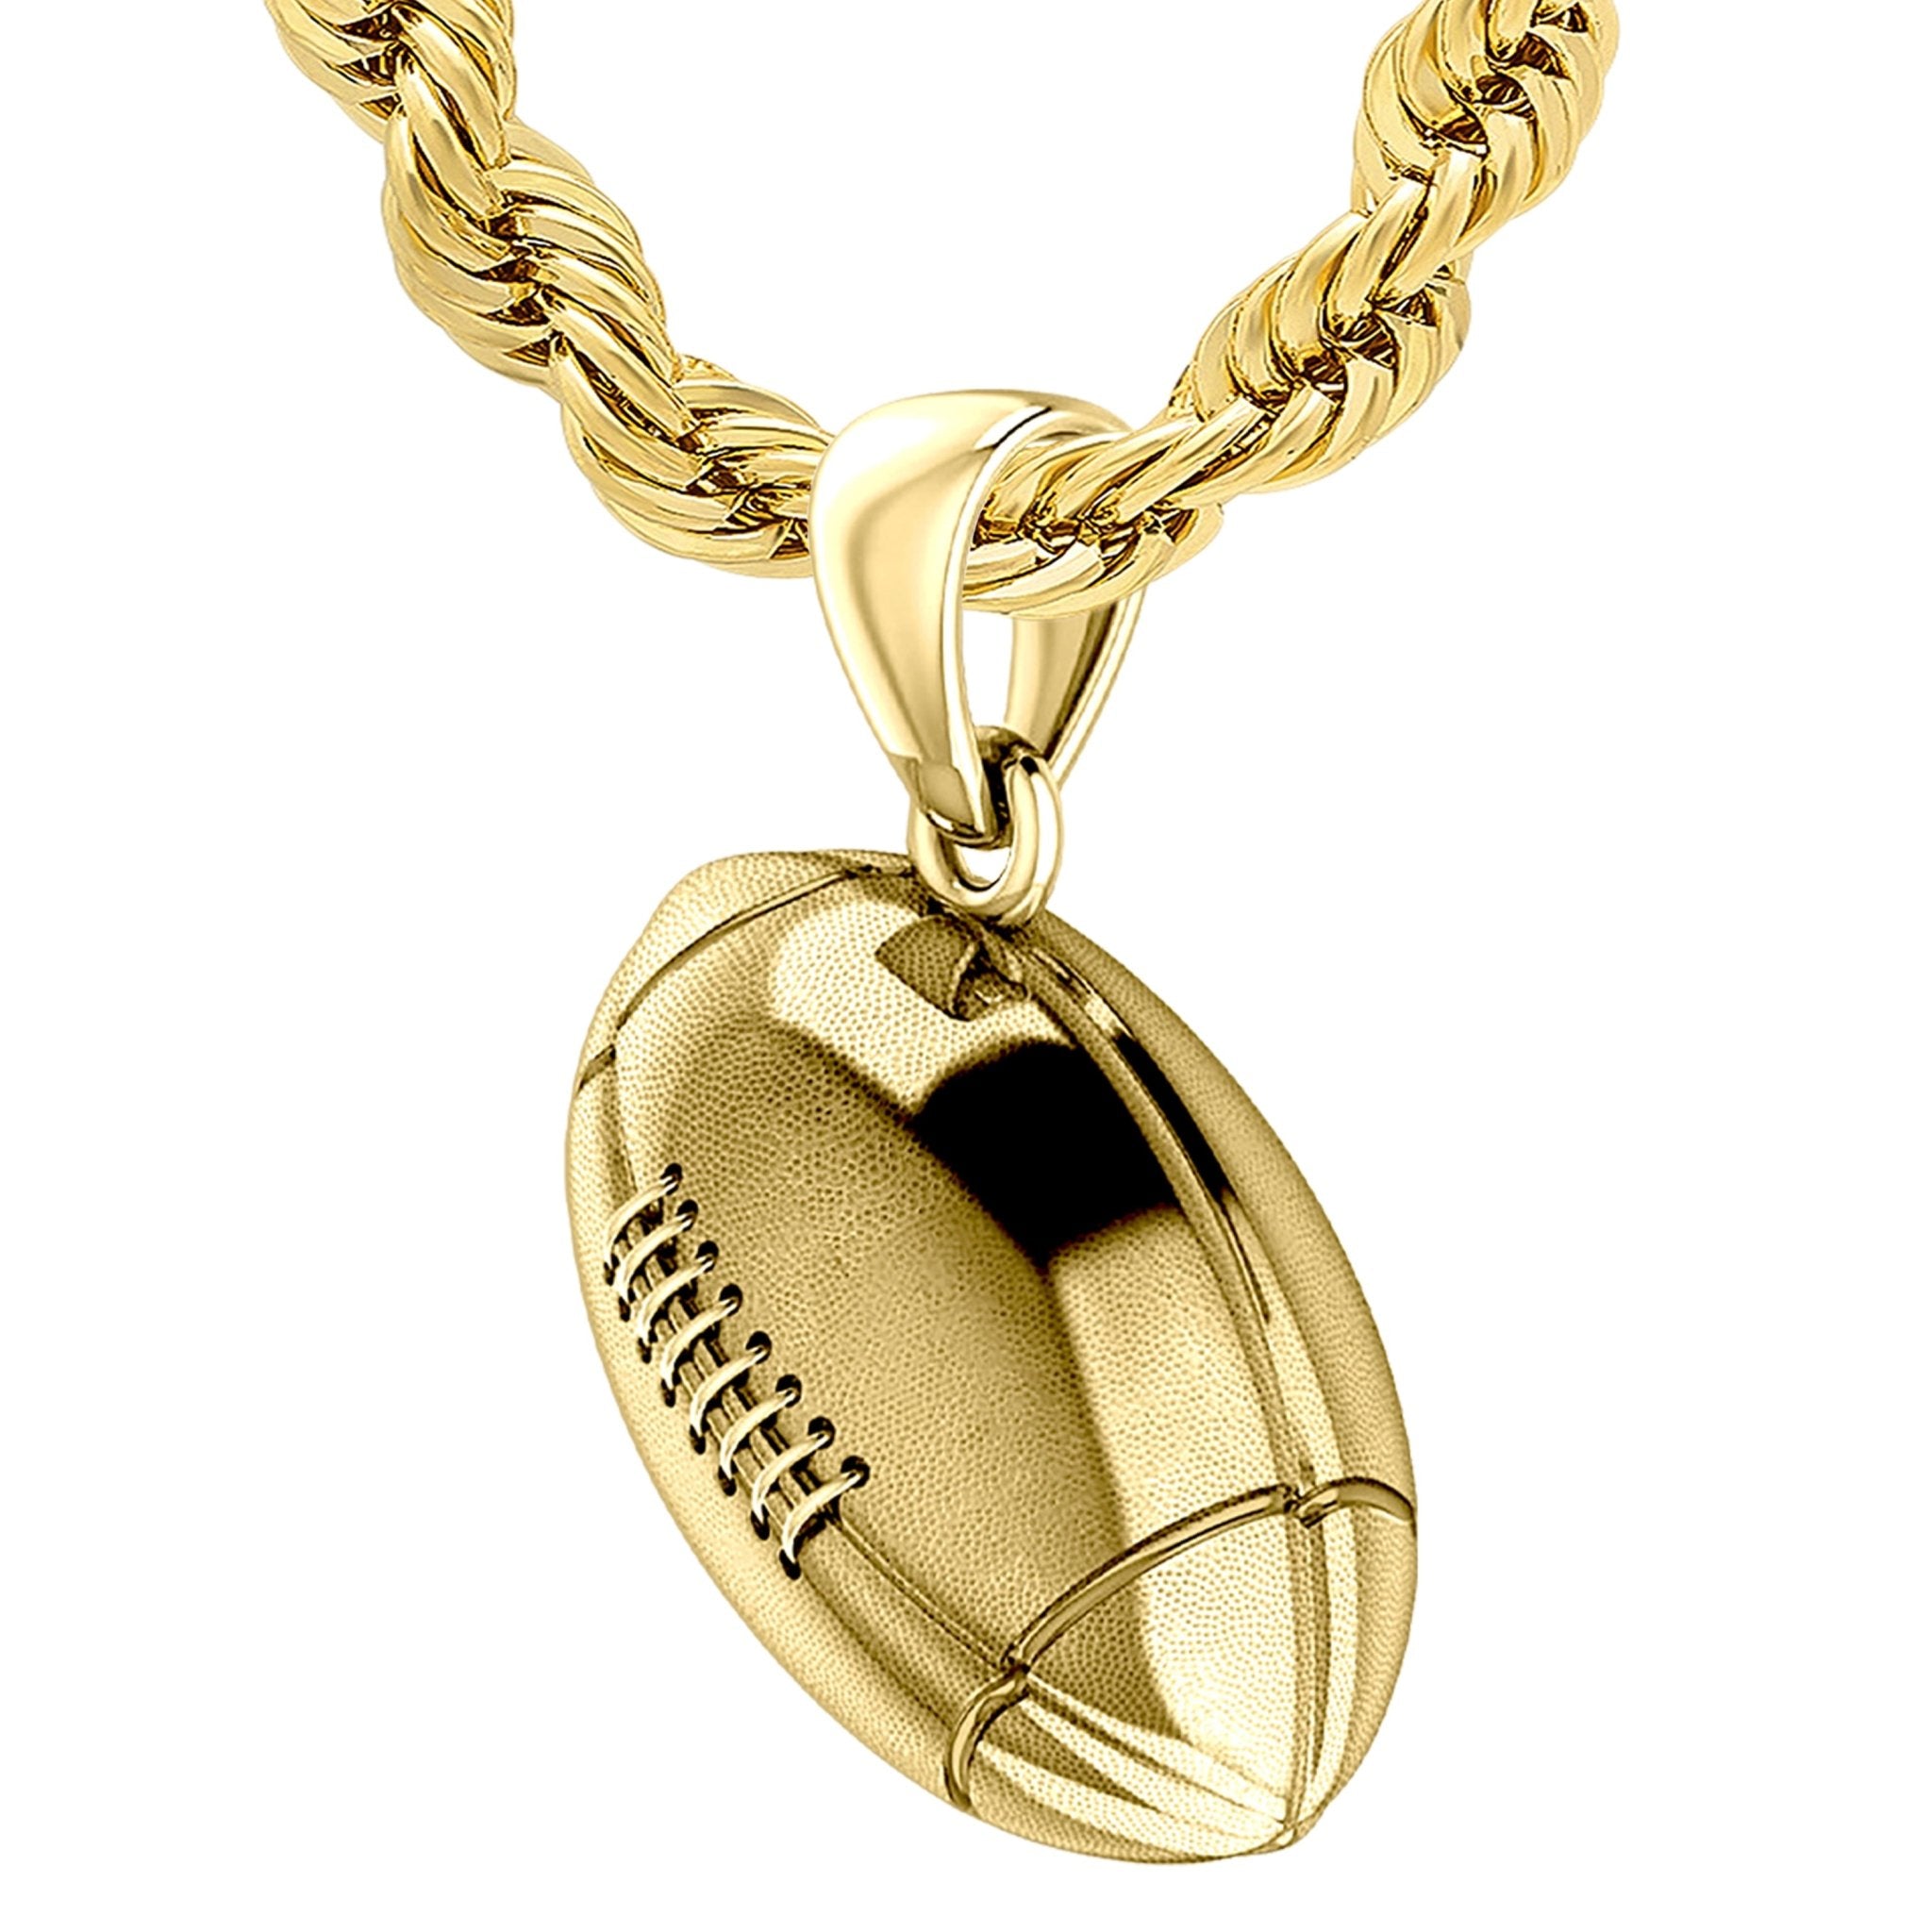 Football Necklace - 3D Gold Football Pendant Necklace